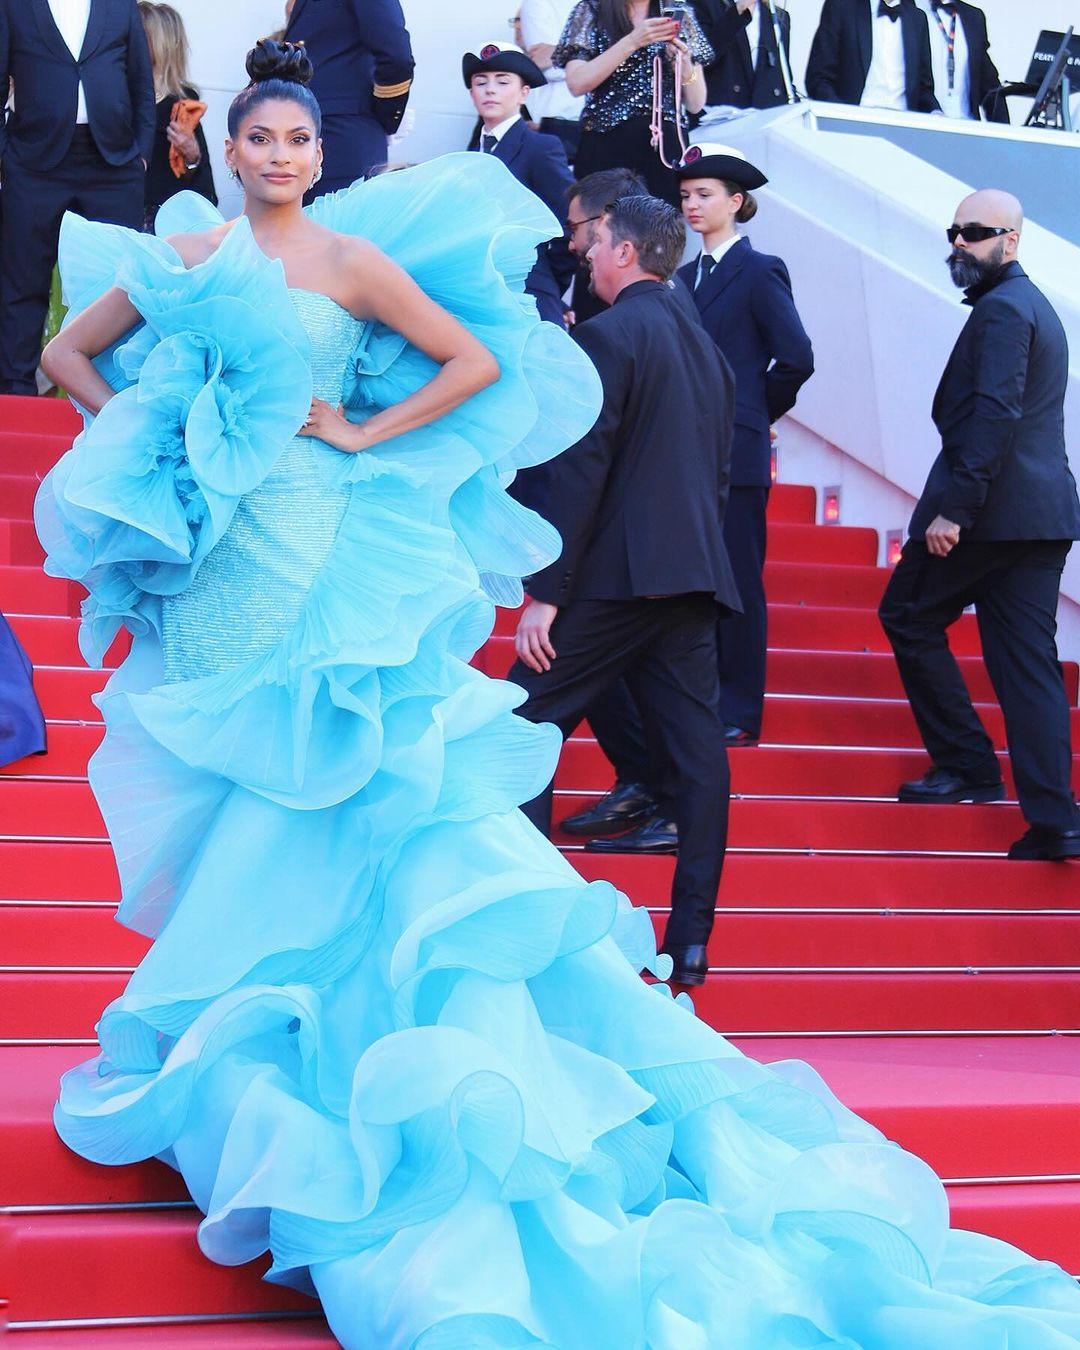 This time around, the reality TV star opted for a grand blue dress from the designer Michael Cinco Private